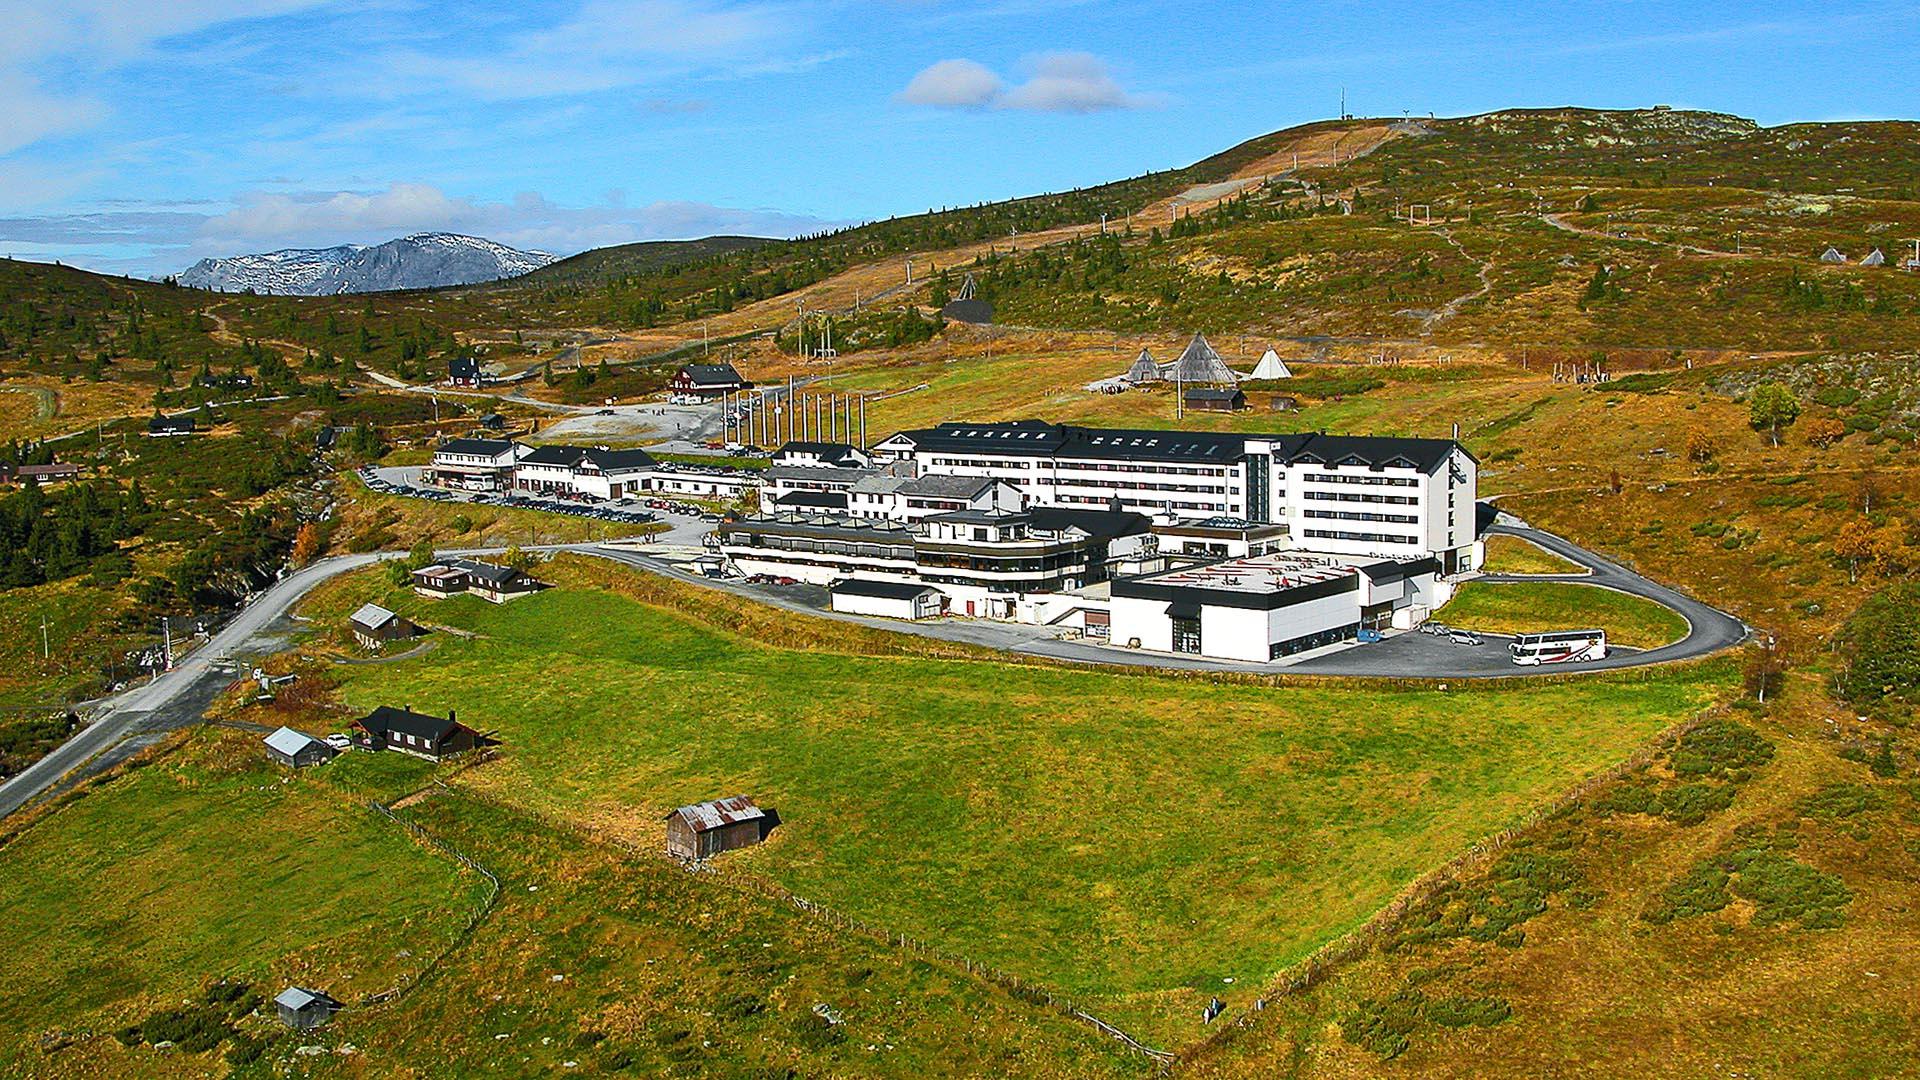 A green mountain hillside with al large white hotel complex